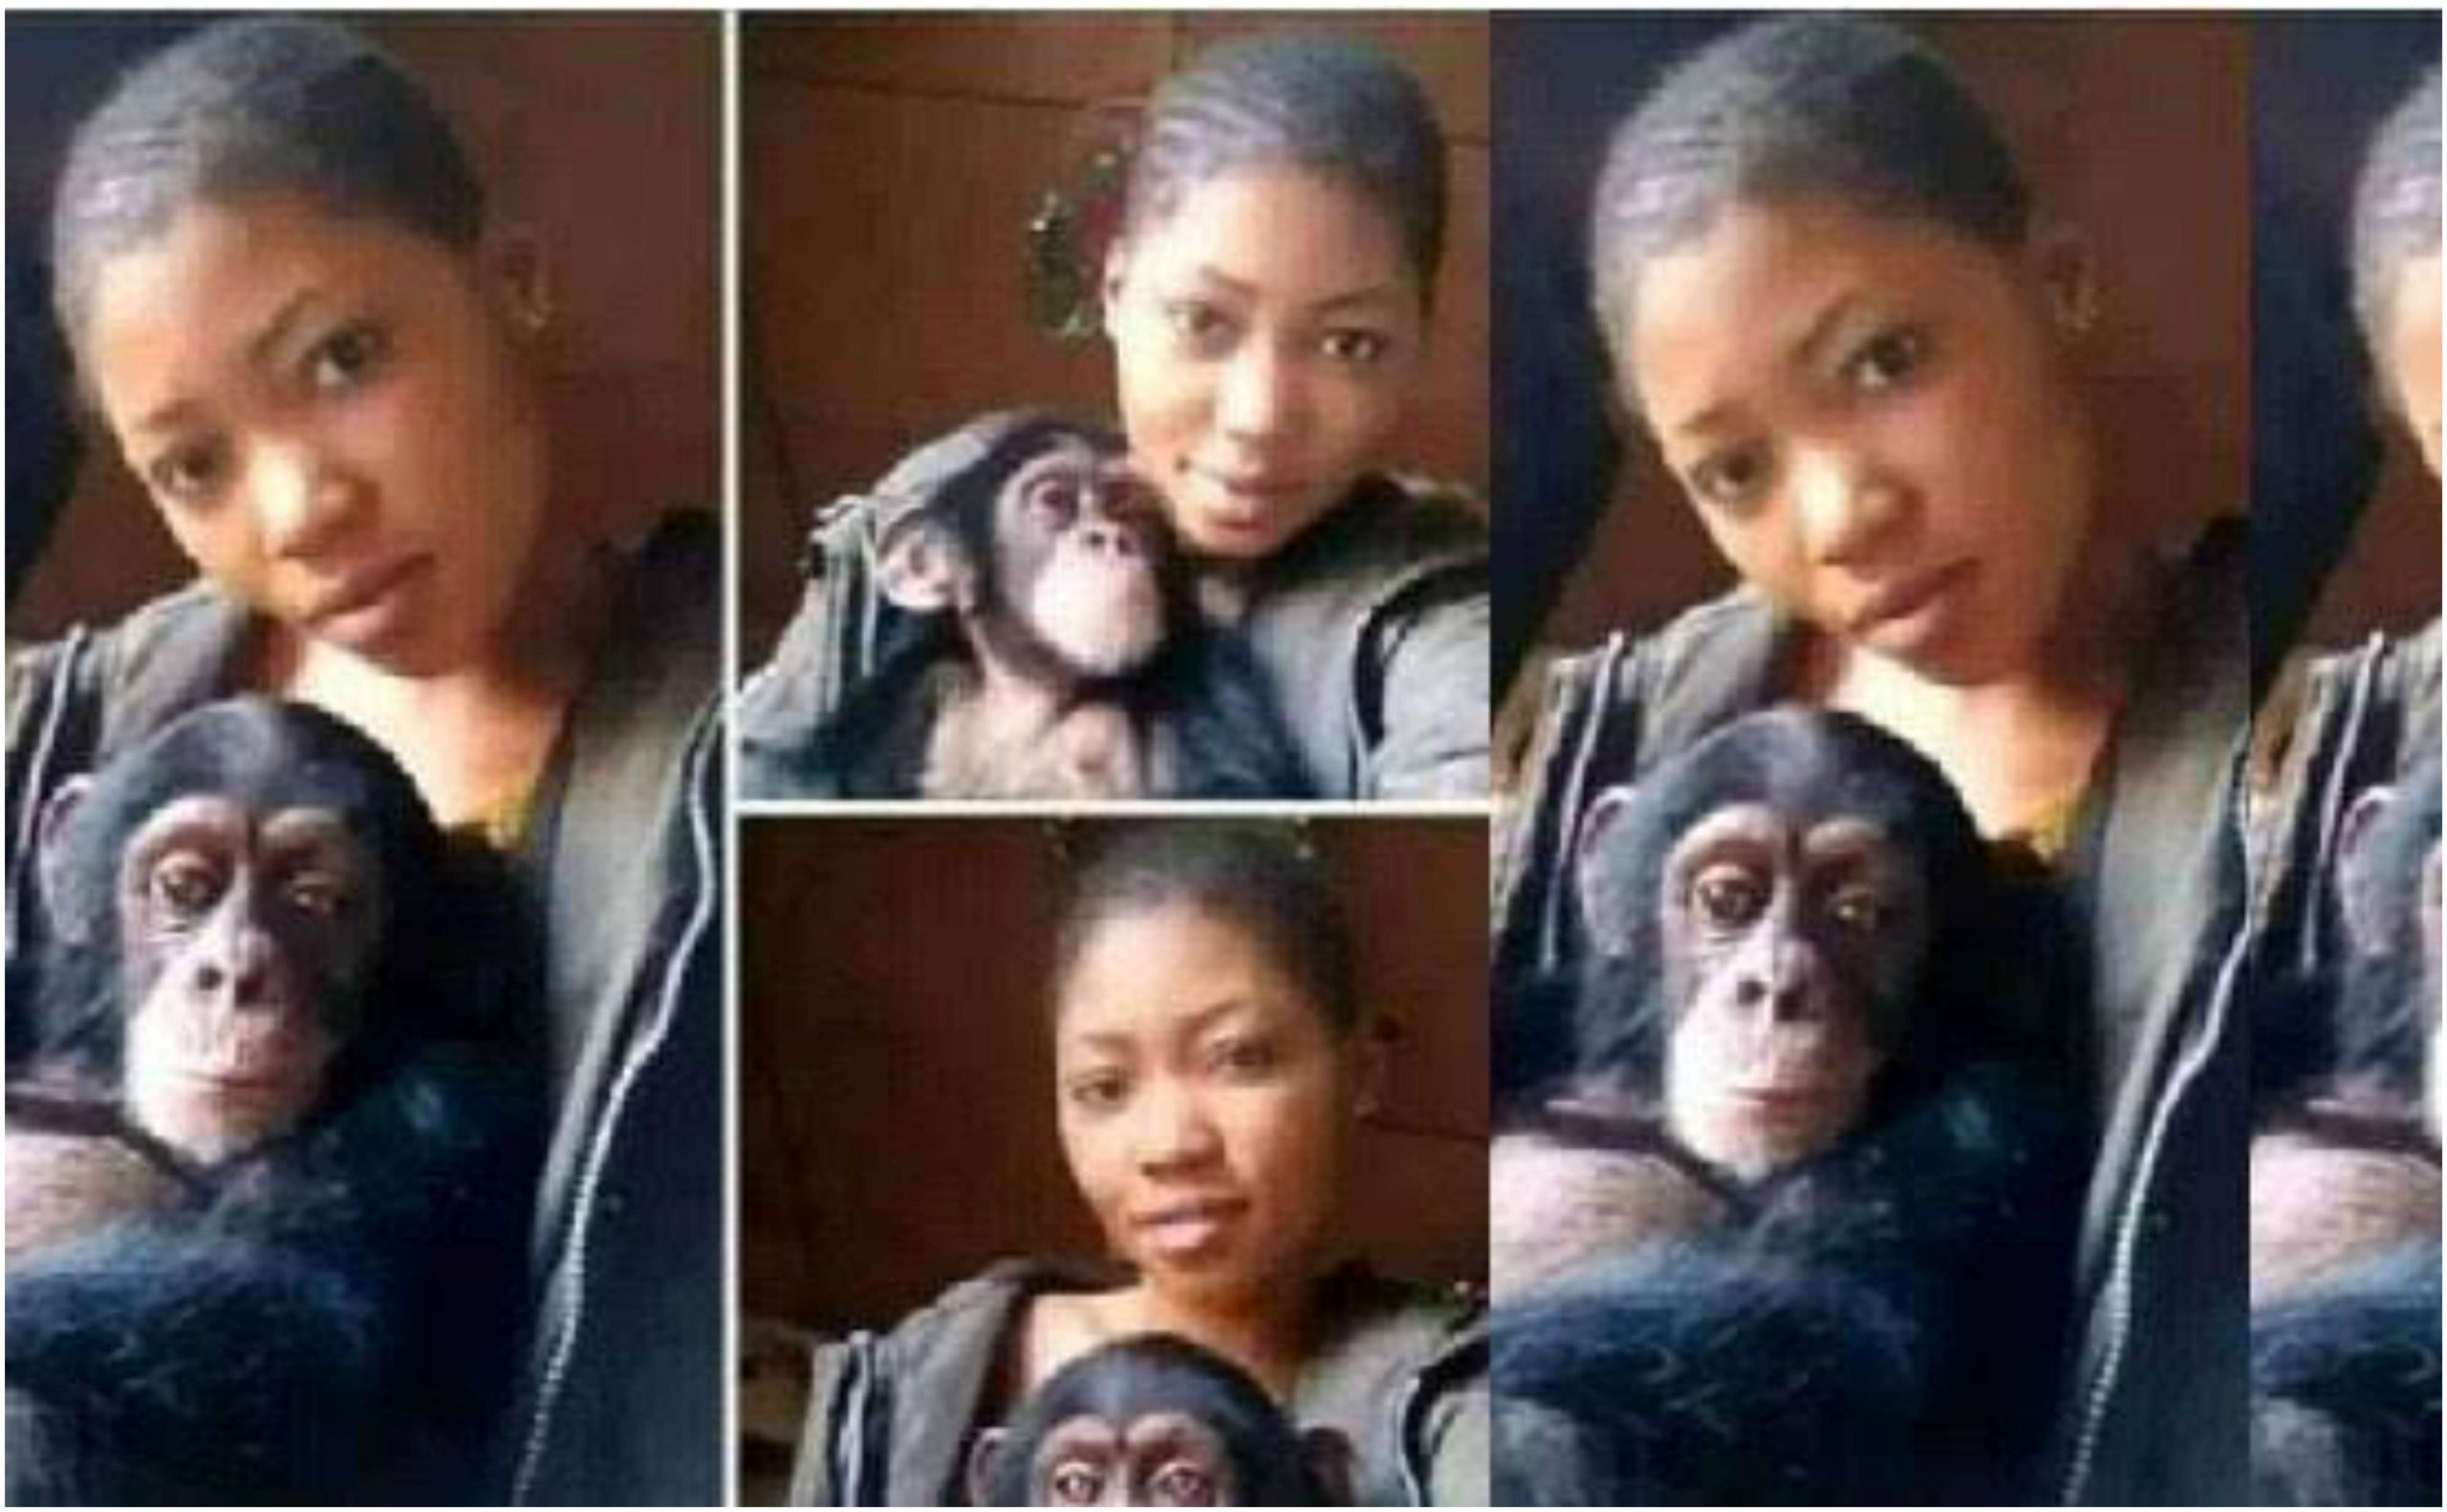 "I will rather date a monkey than date a man"- Lady fumes.